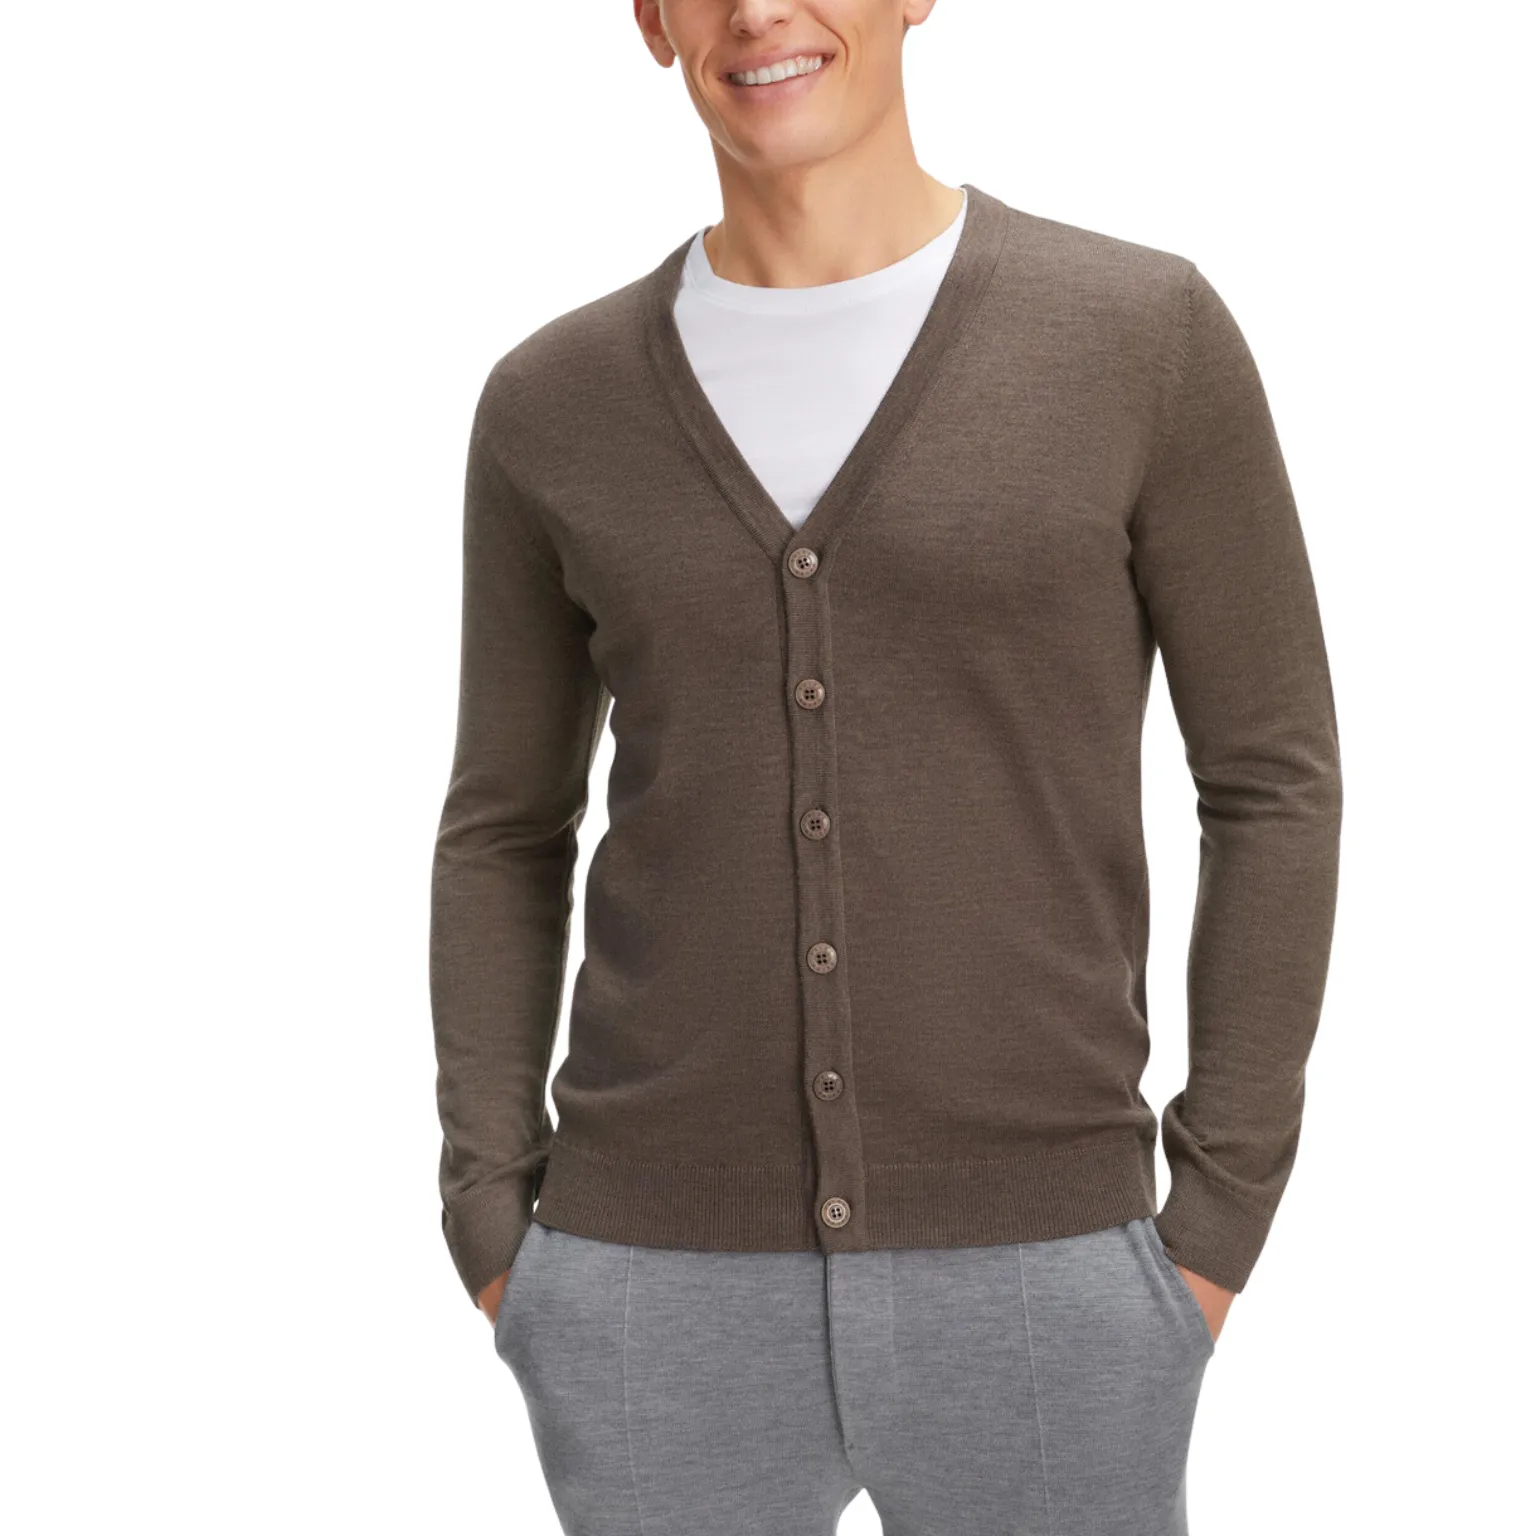 Cardigan Sweater manufacturing with trendy design